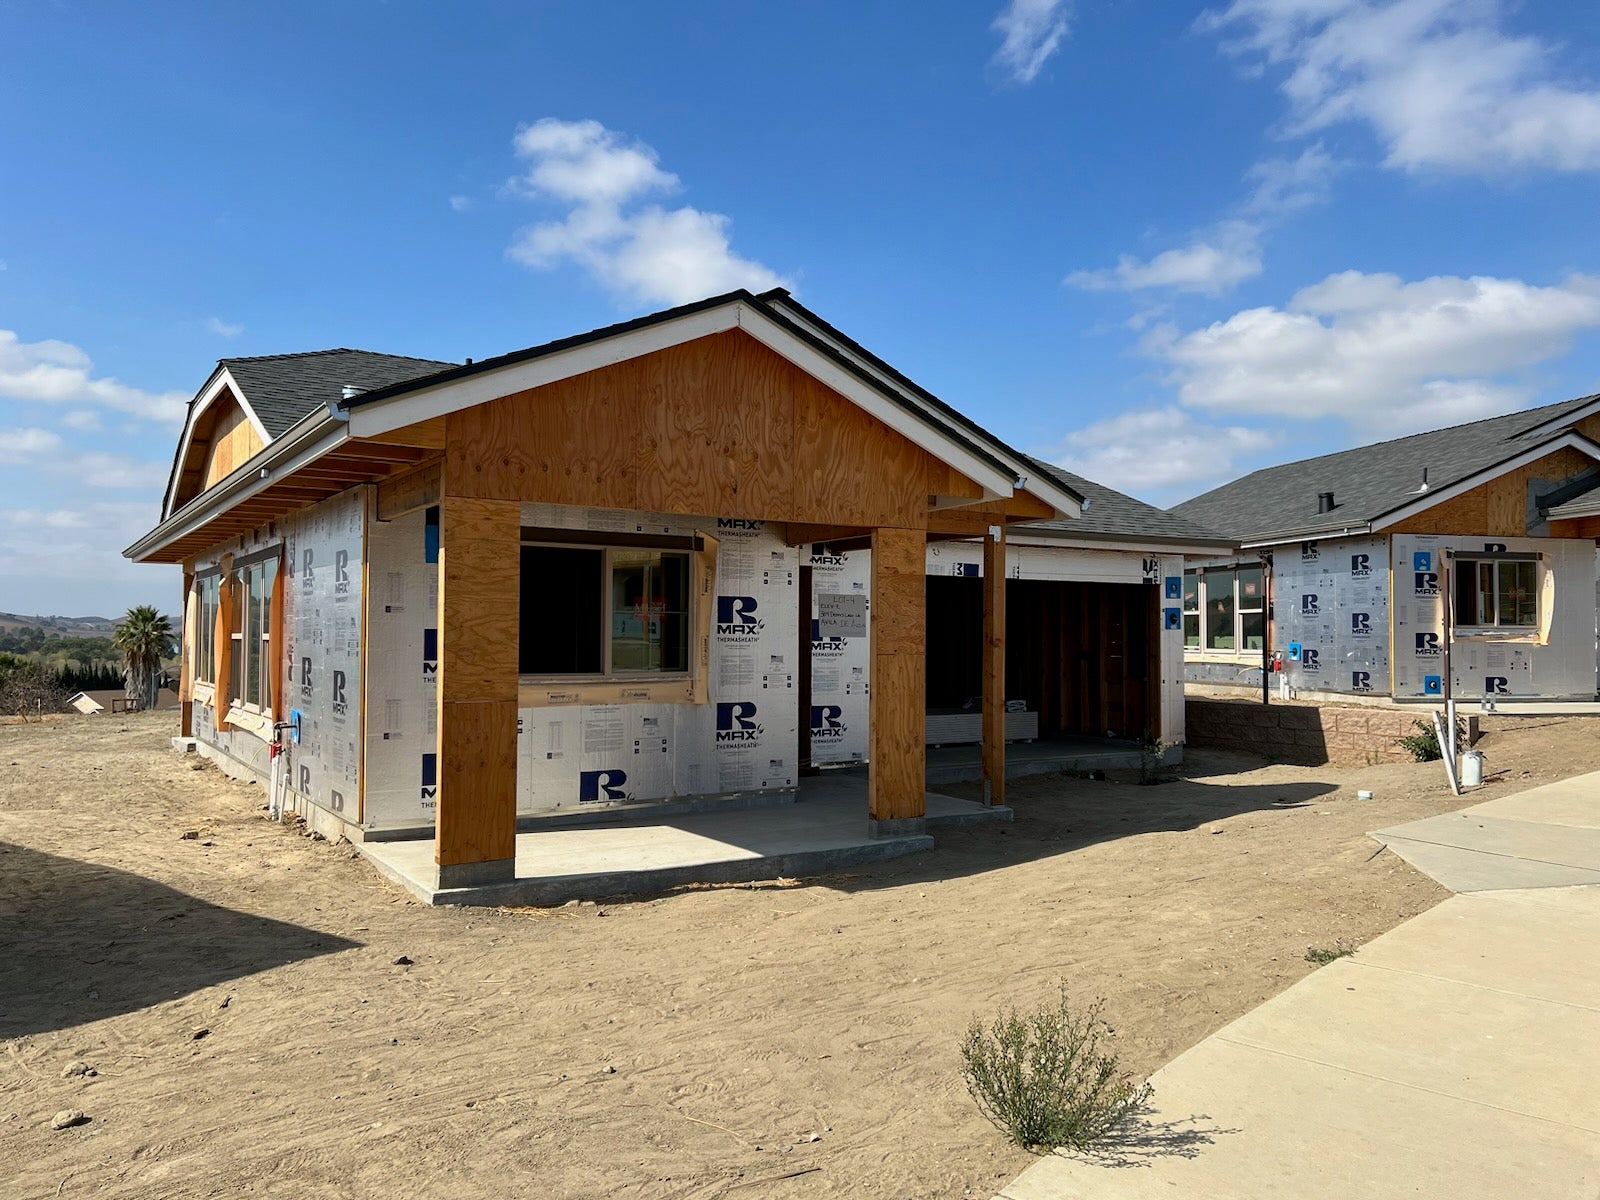 All-Electric, Affordable Housing Nears Completion with Support from Central Coast Community Energy